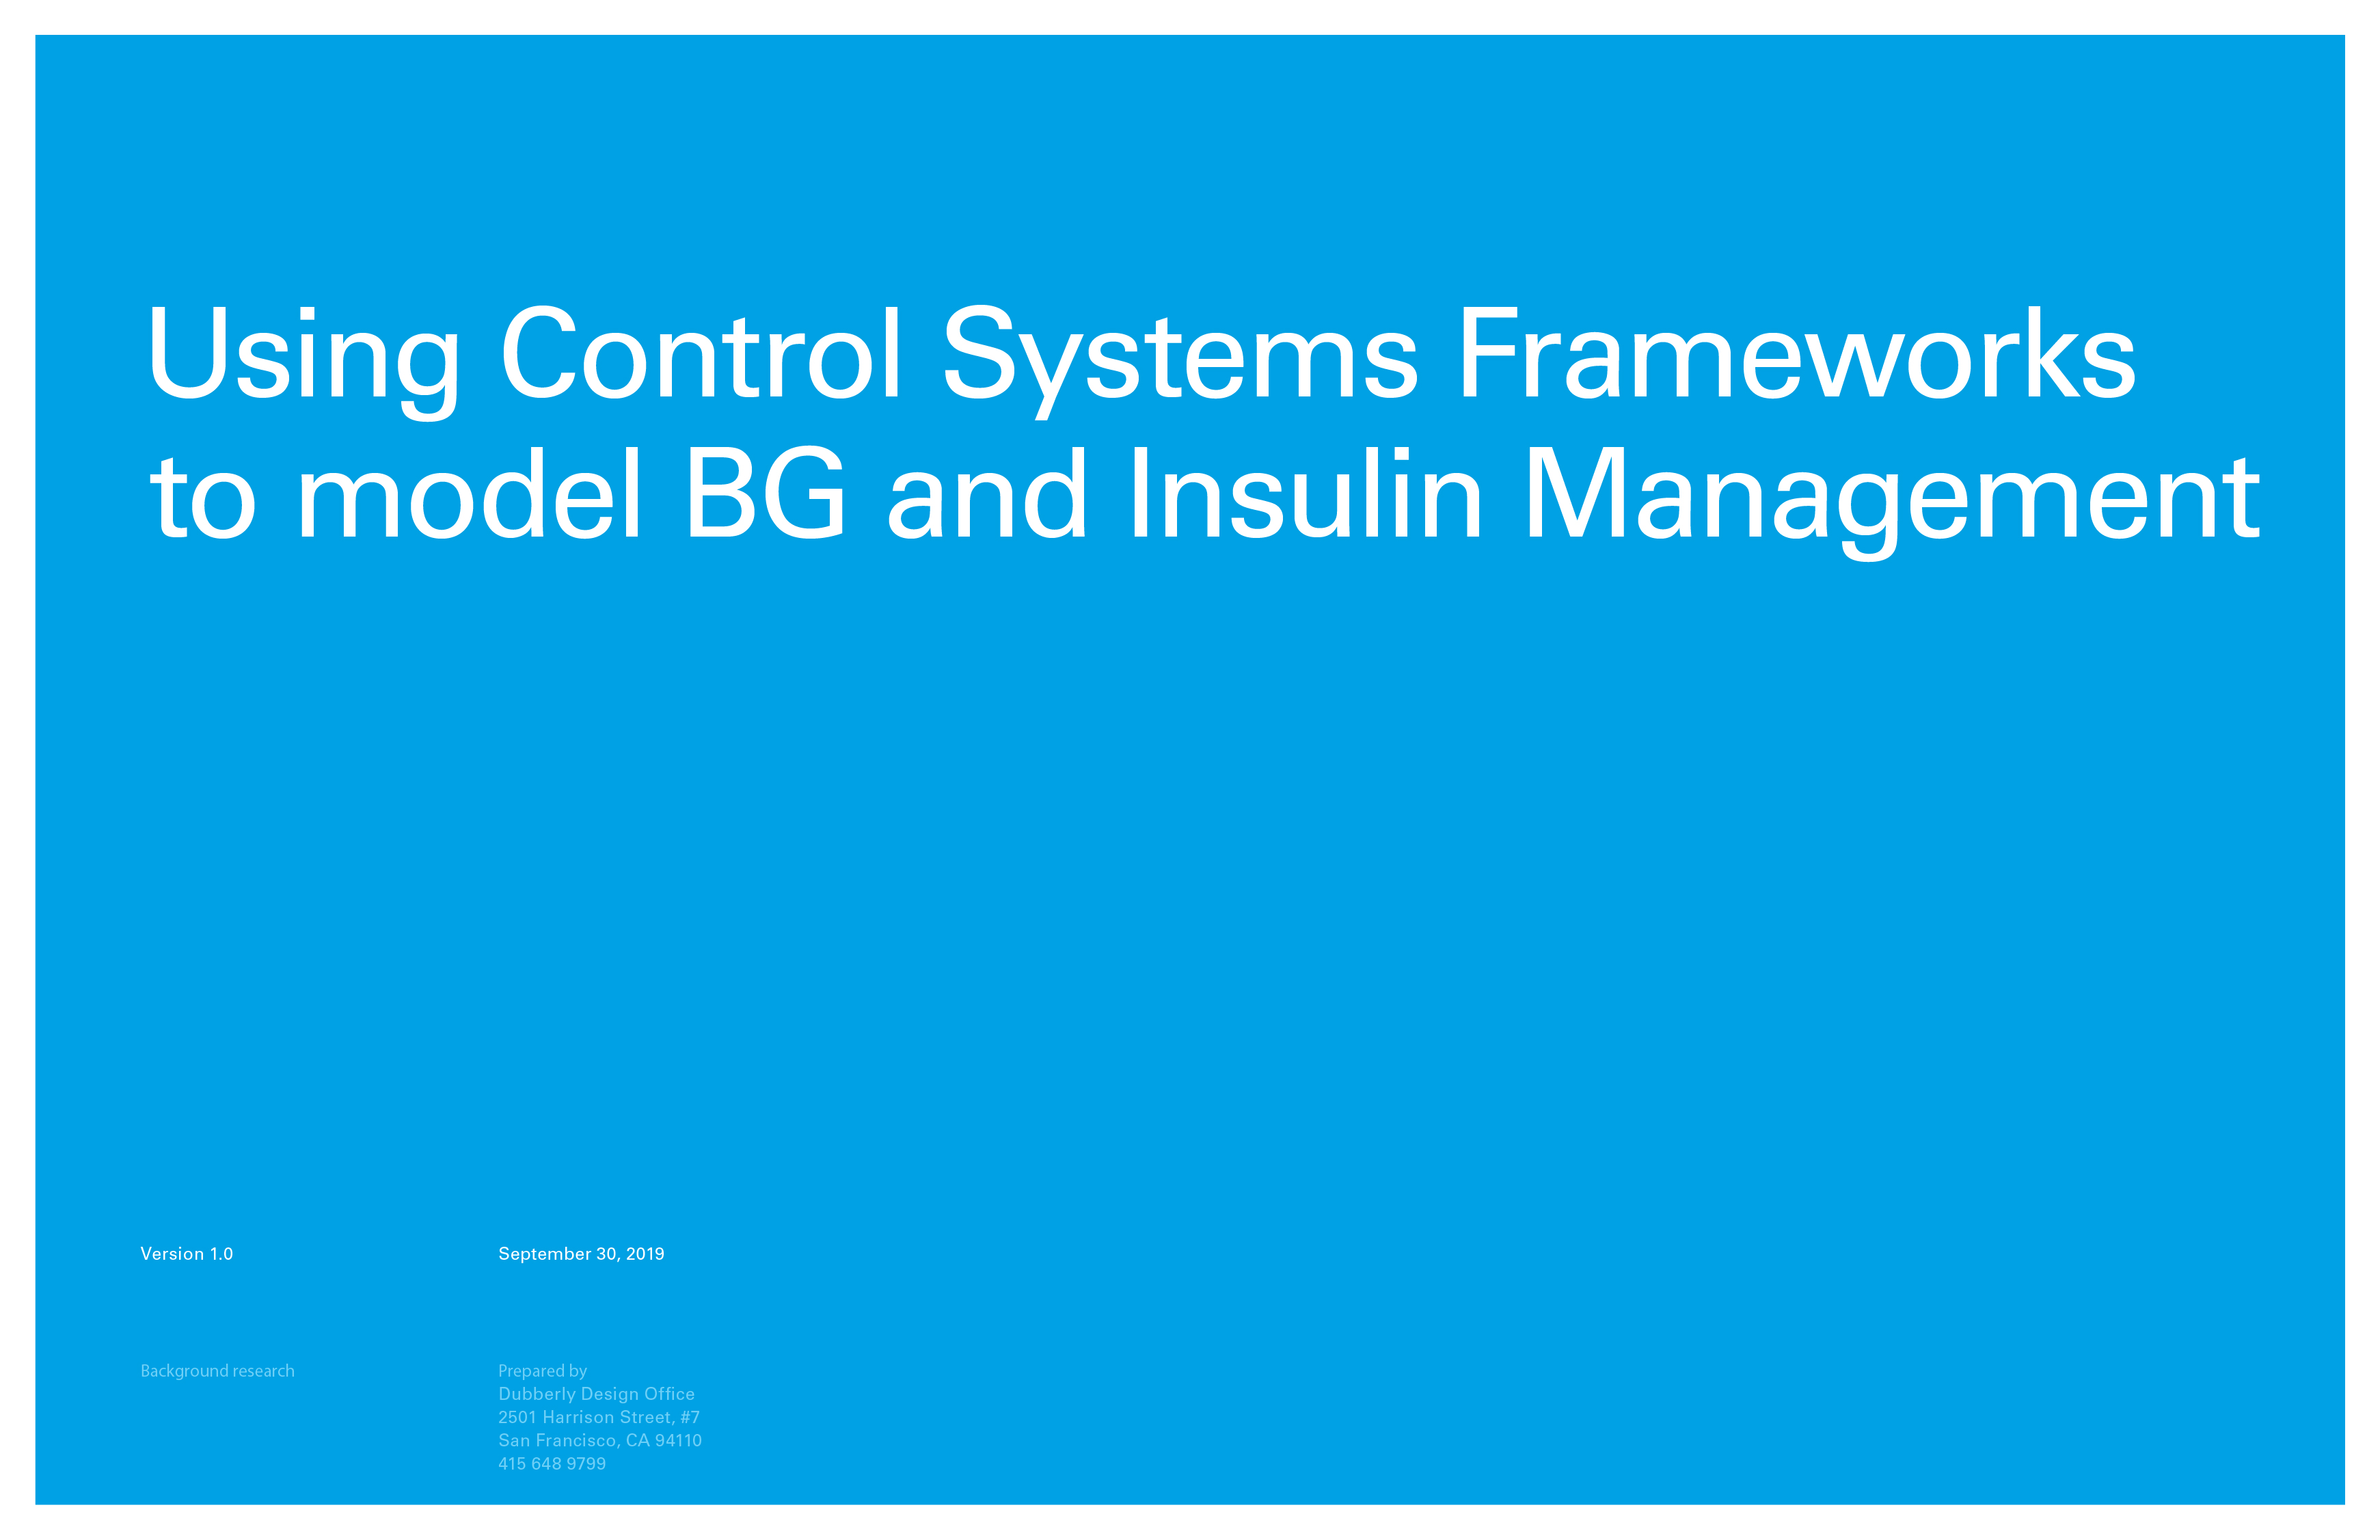 Using Control Systems Framework to model BG and Insulin Management